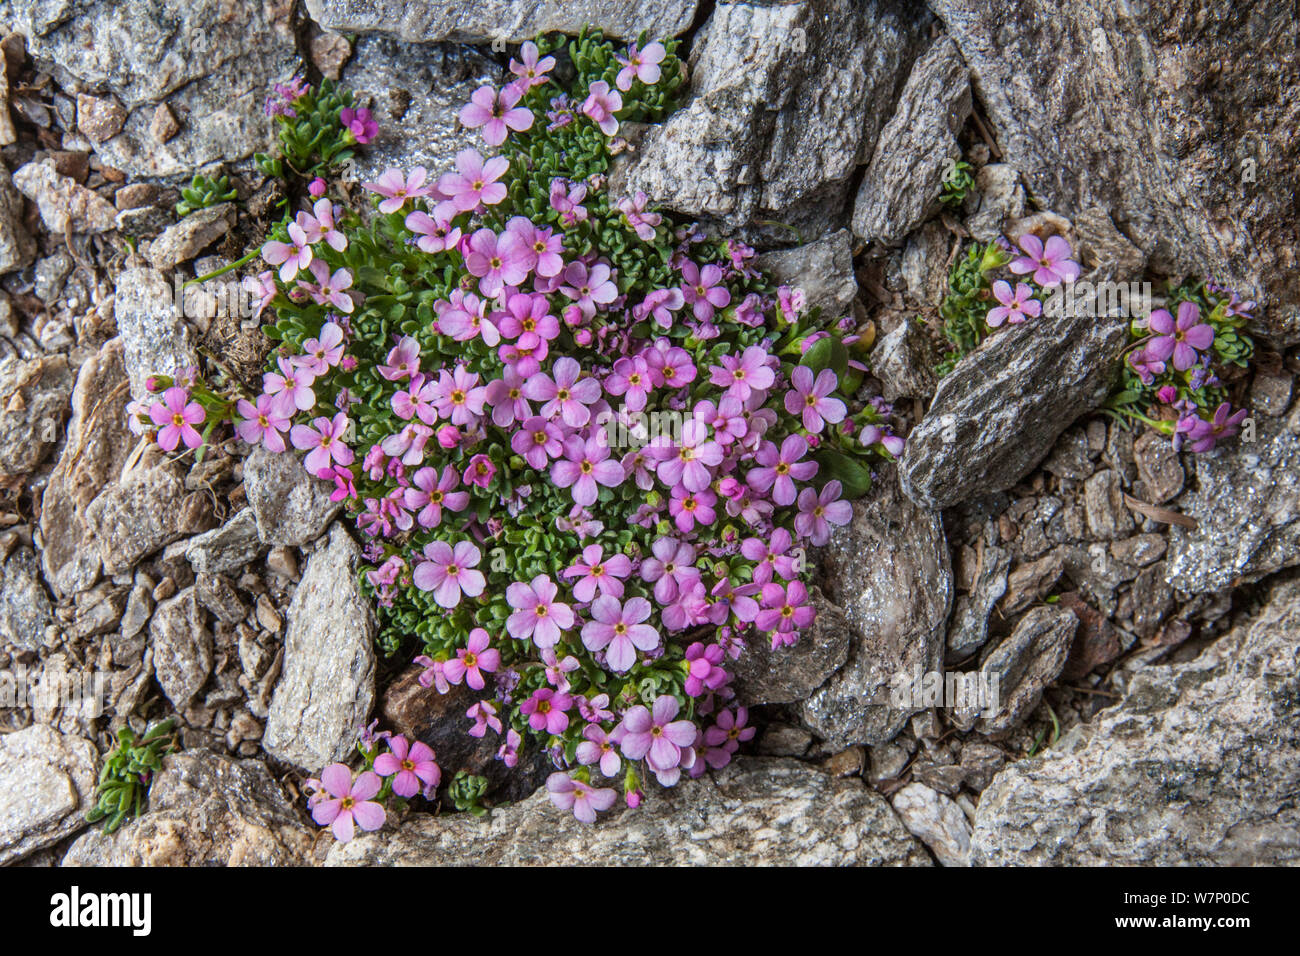 Alpine Rock Jasmine (Androsace alpina) growing amongst scree at 2800 metres altitude in Gran Paradiso National Park, Aosta Valley, Pennine Alps, Italy. July. Stock Photo